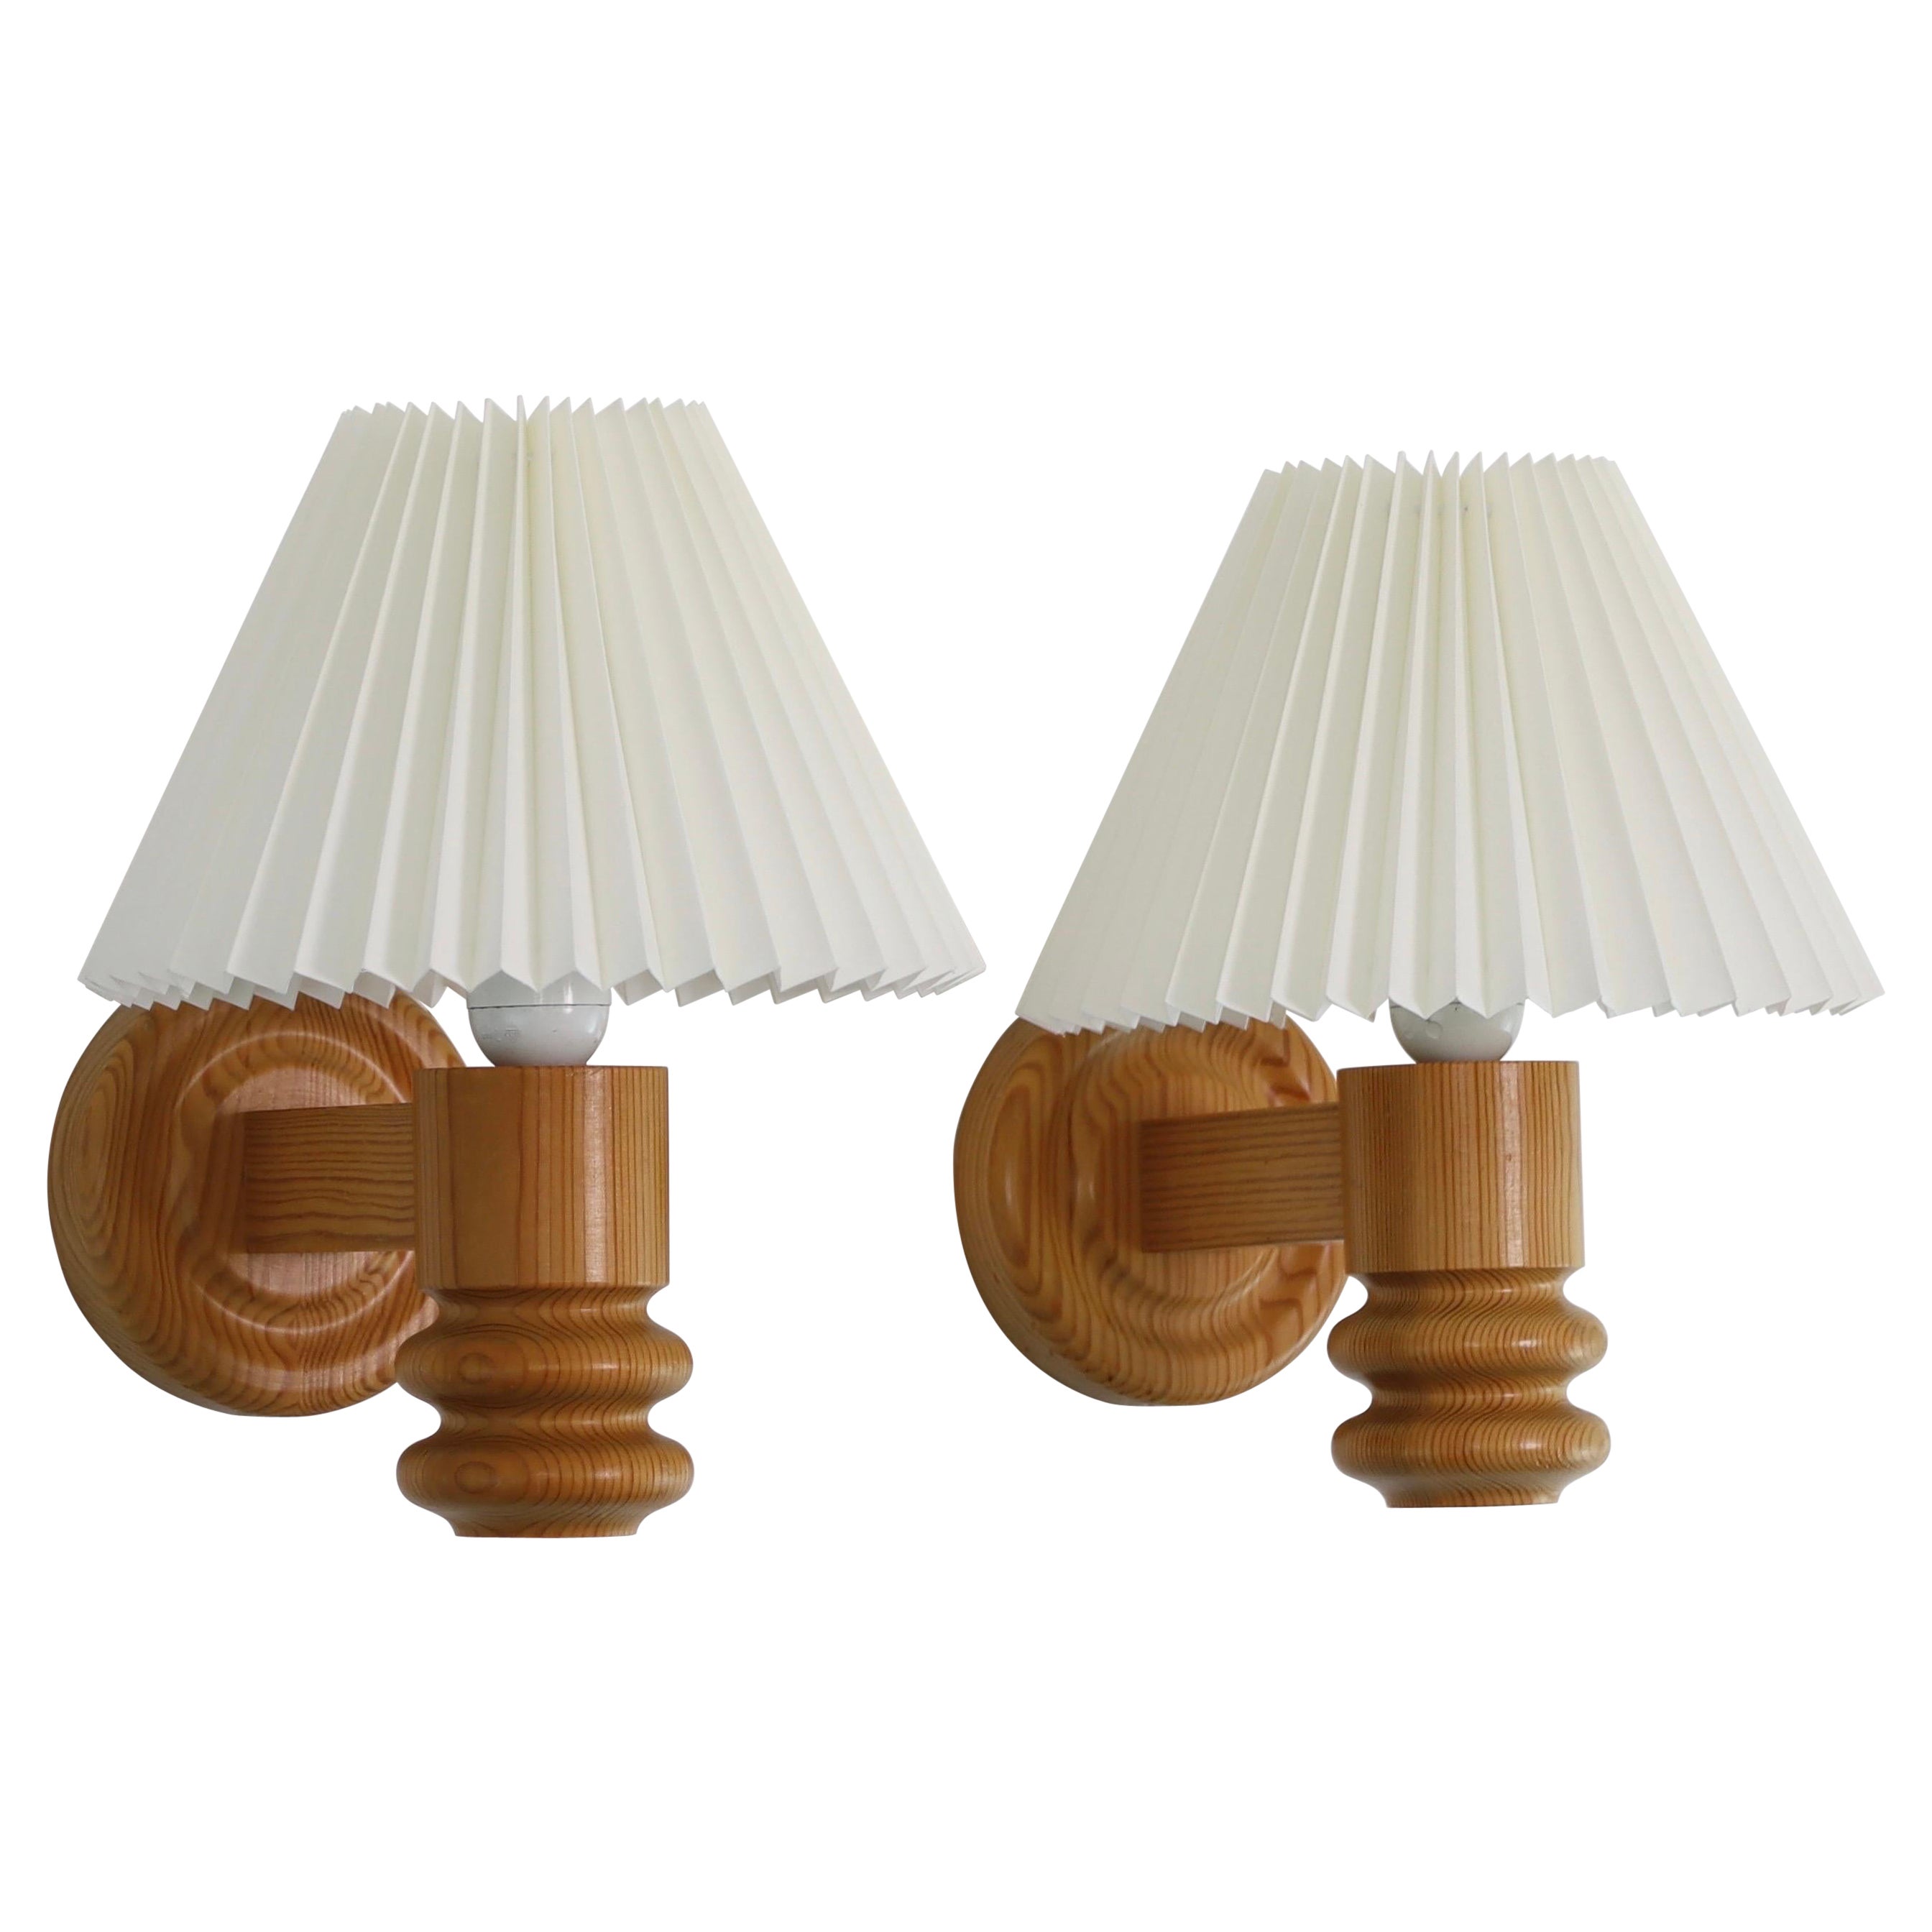 Set of Swedish Pine Wood Wall Lamps by Solbackens Svarveri, Sweden, 1970s For Sale